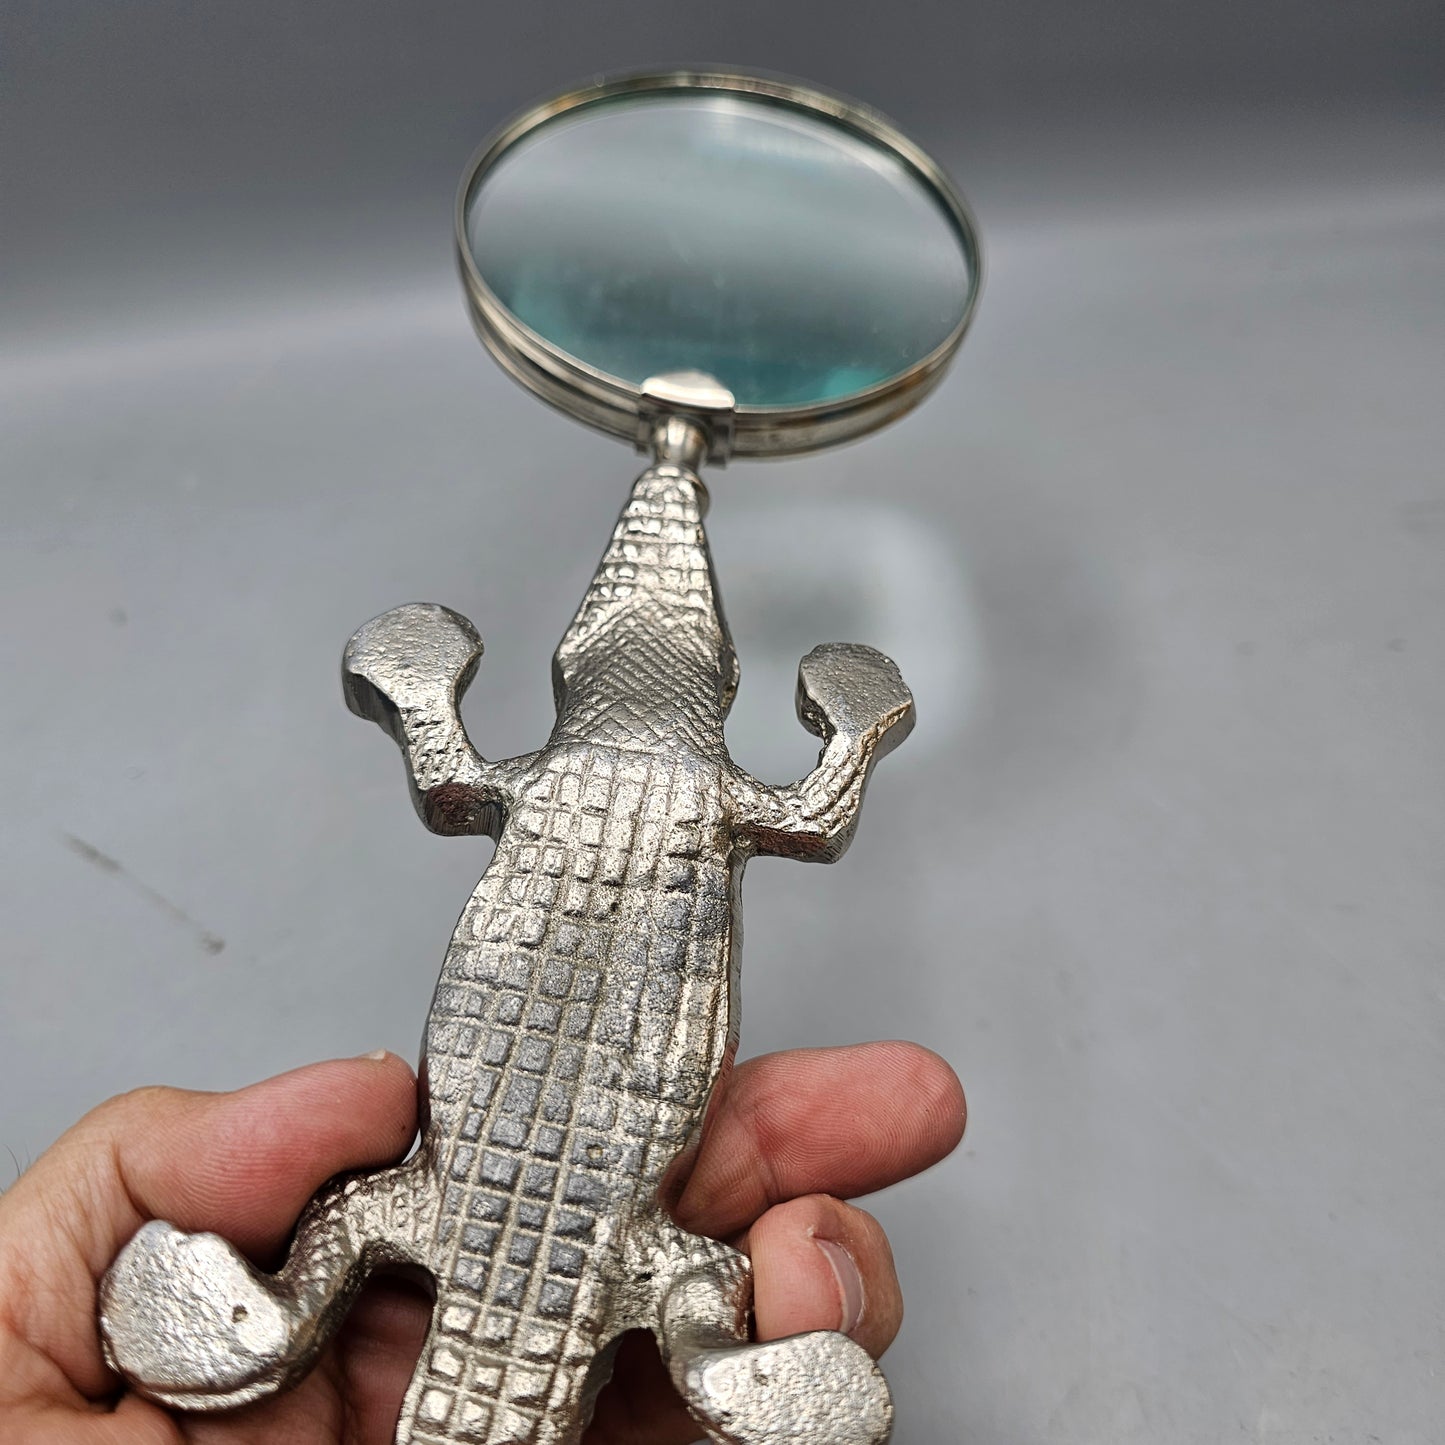 Nickel Finish Magnifying Glass with Lizard Shaped Handle